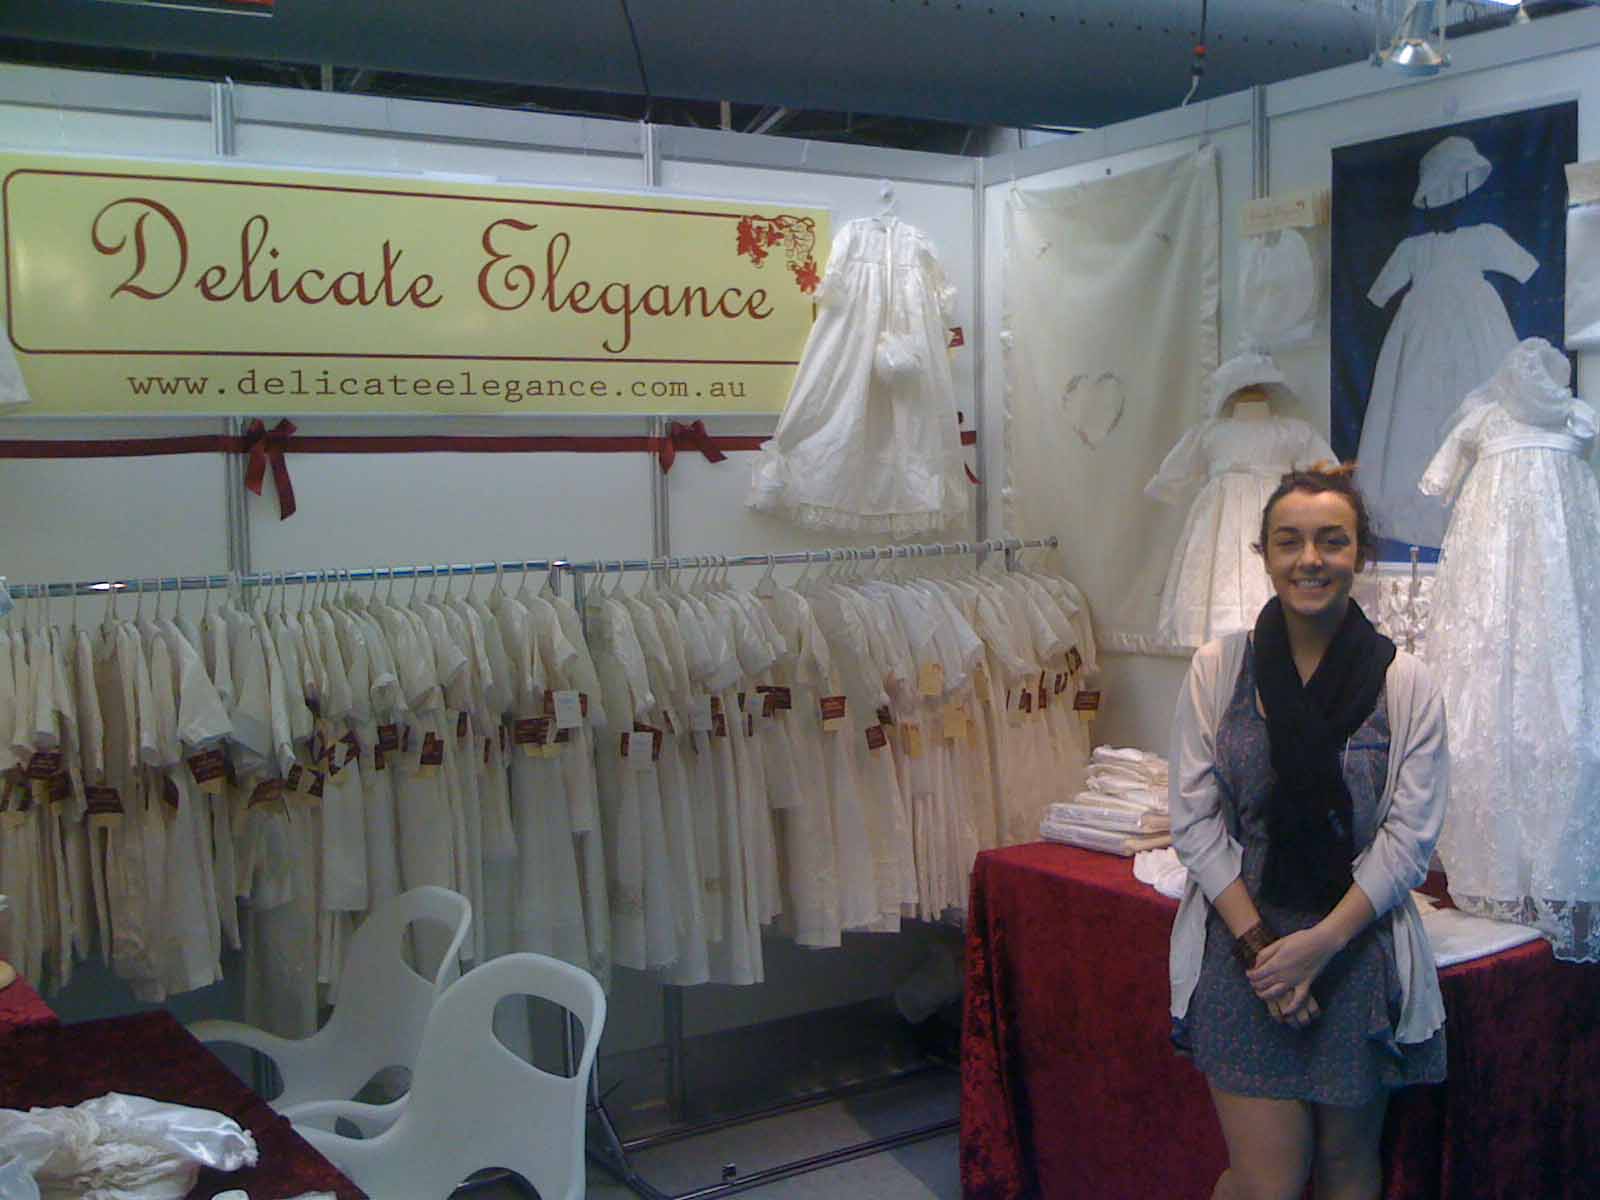 Delicate Elegance exhibiting at ENK Children's Club trade show in New York, USA in August 2010